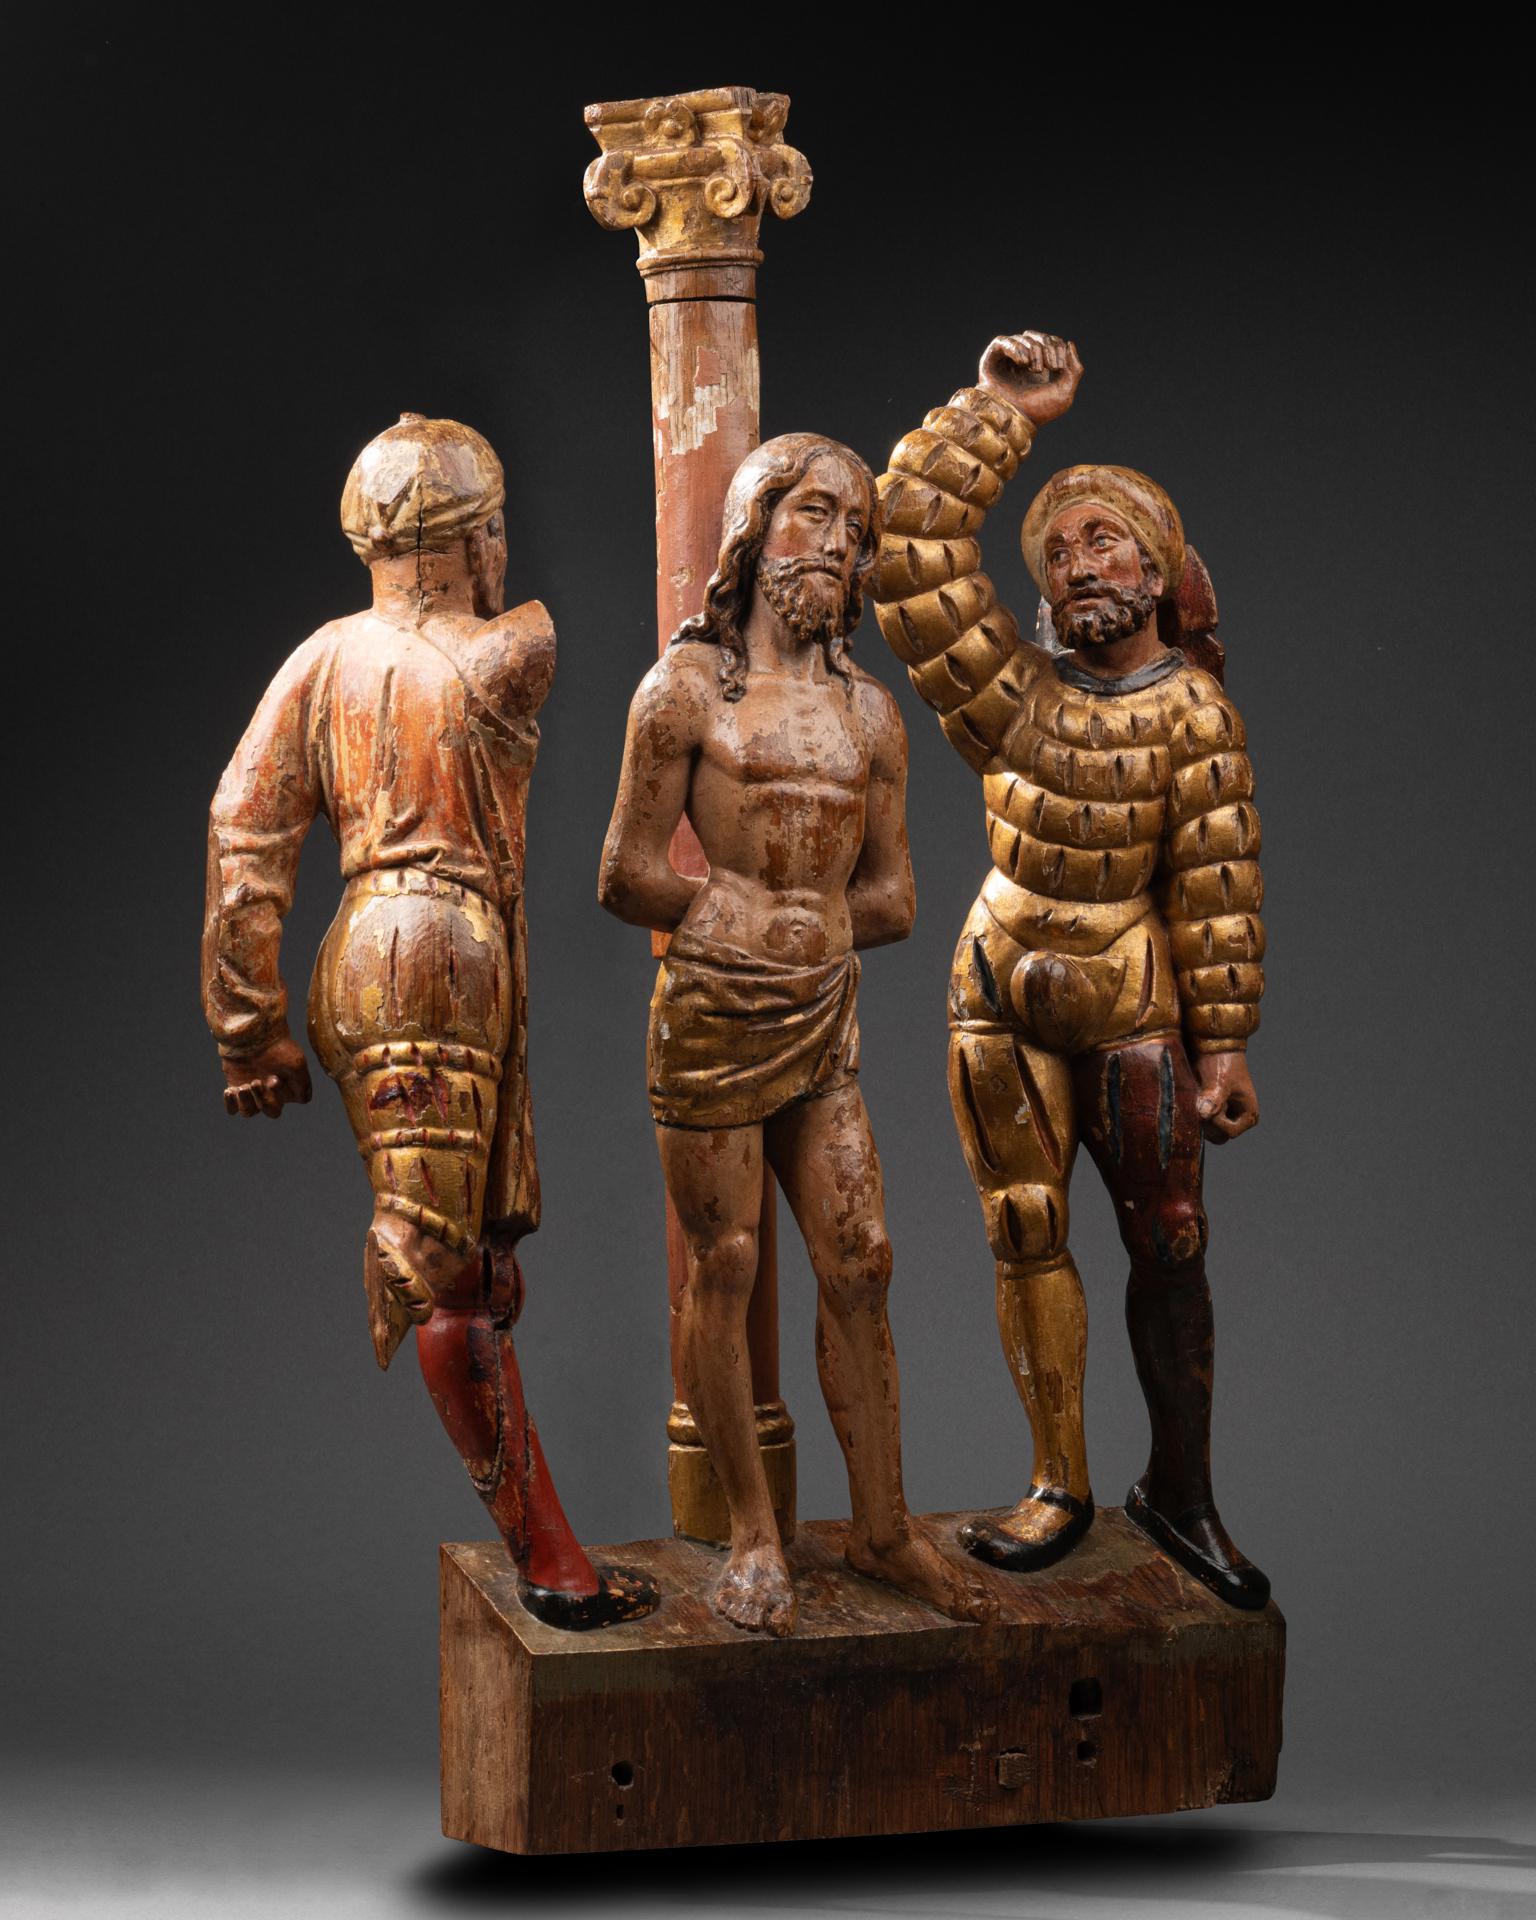 Altarpiece group representing the flagellation
Brabant, circa 1560-1580
Carved wood, polychrome, and gilded
50 x 38 x 7 cm

At the center of the group, Christ stands upright, leaning against the column, his wrists bound behind his back, his left leg